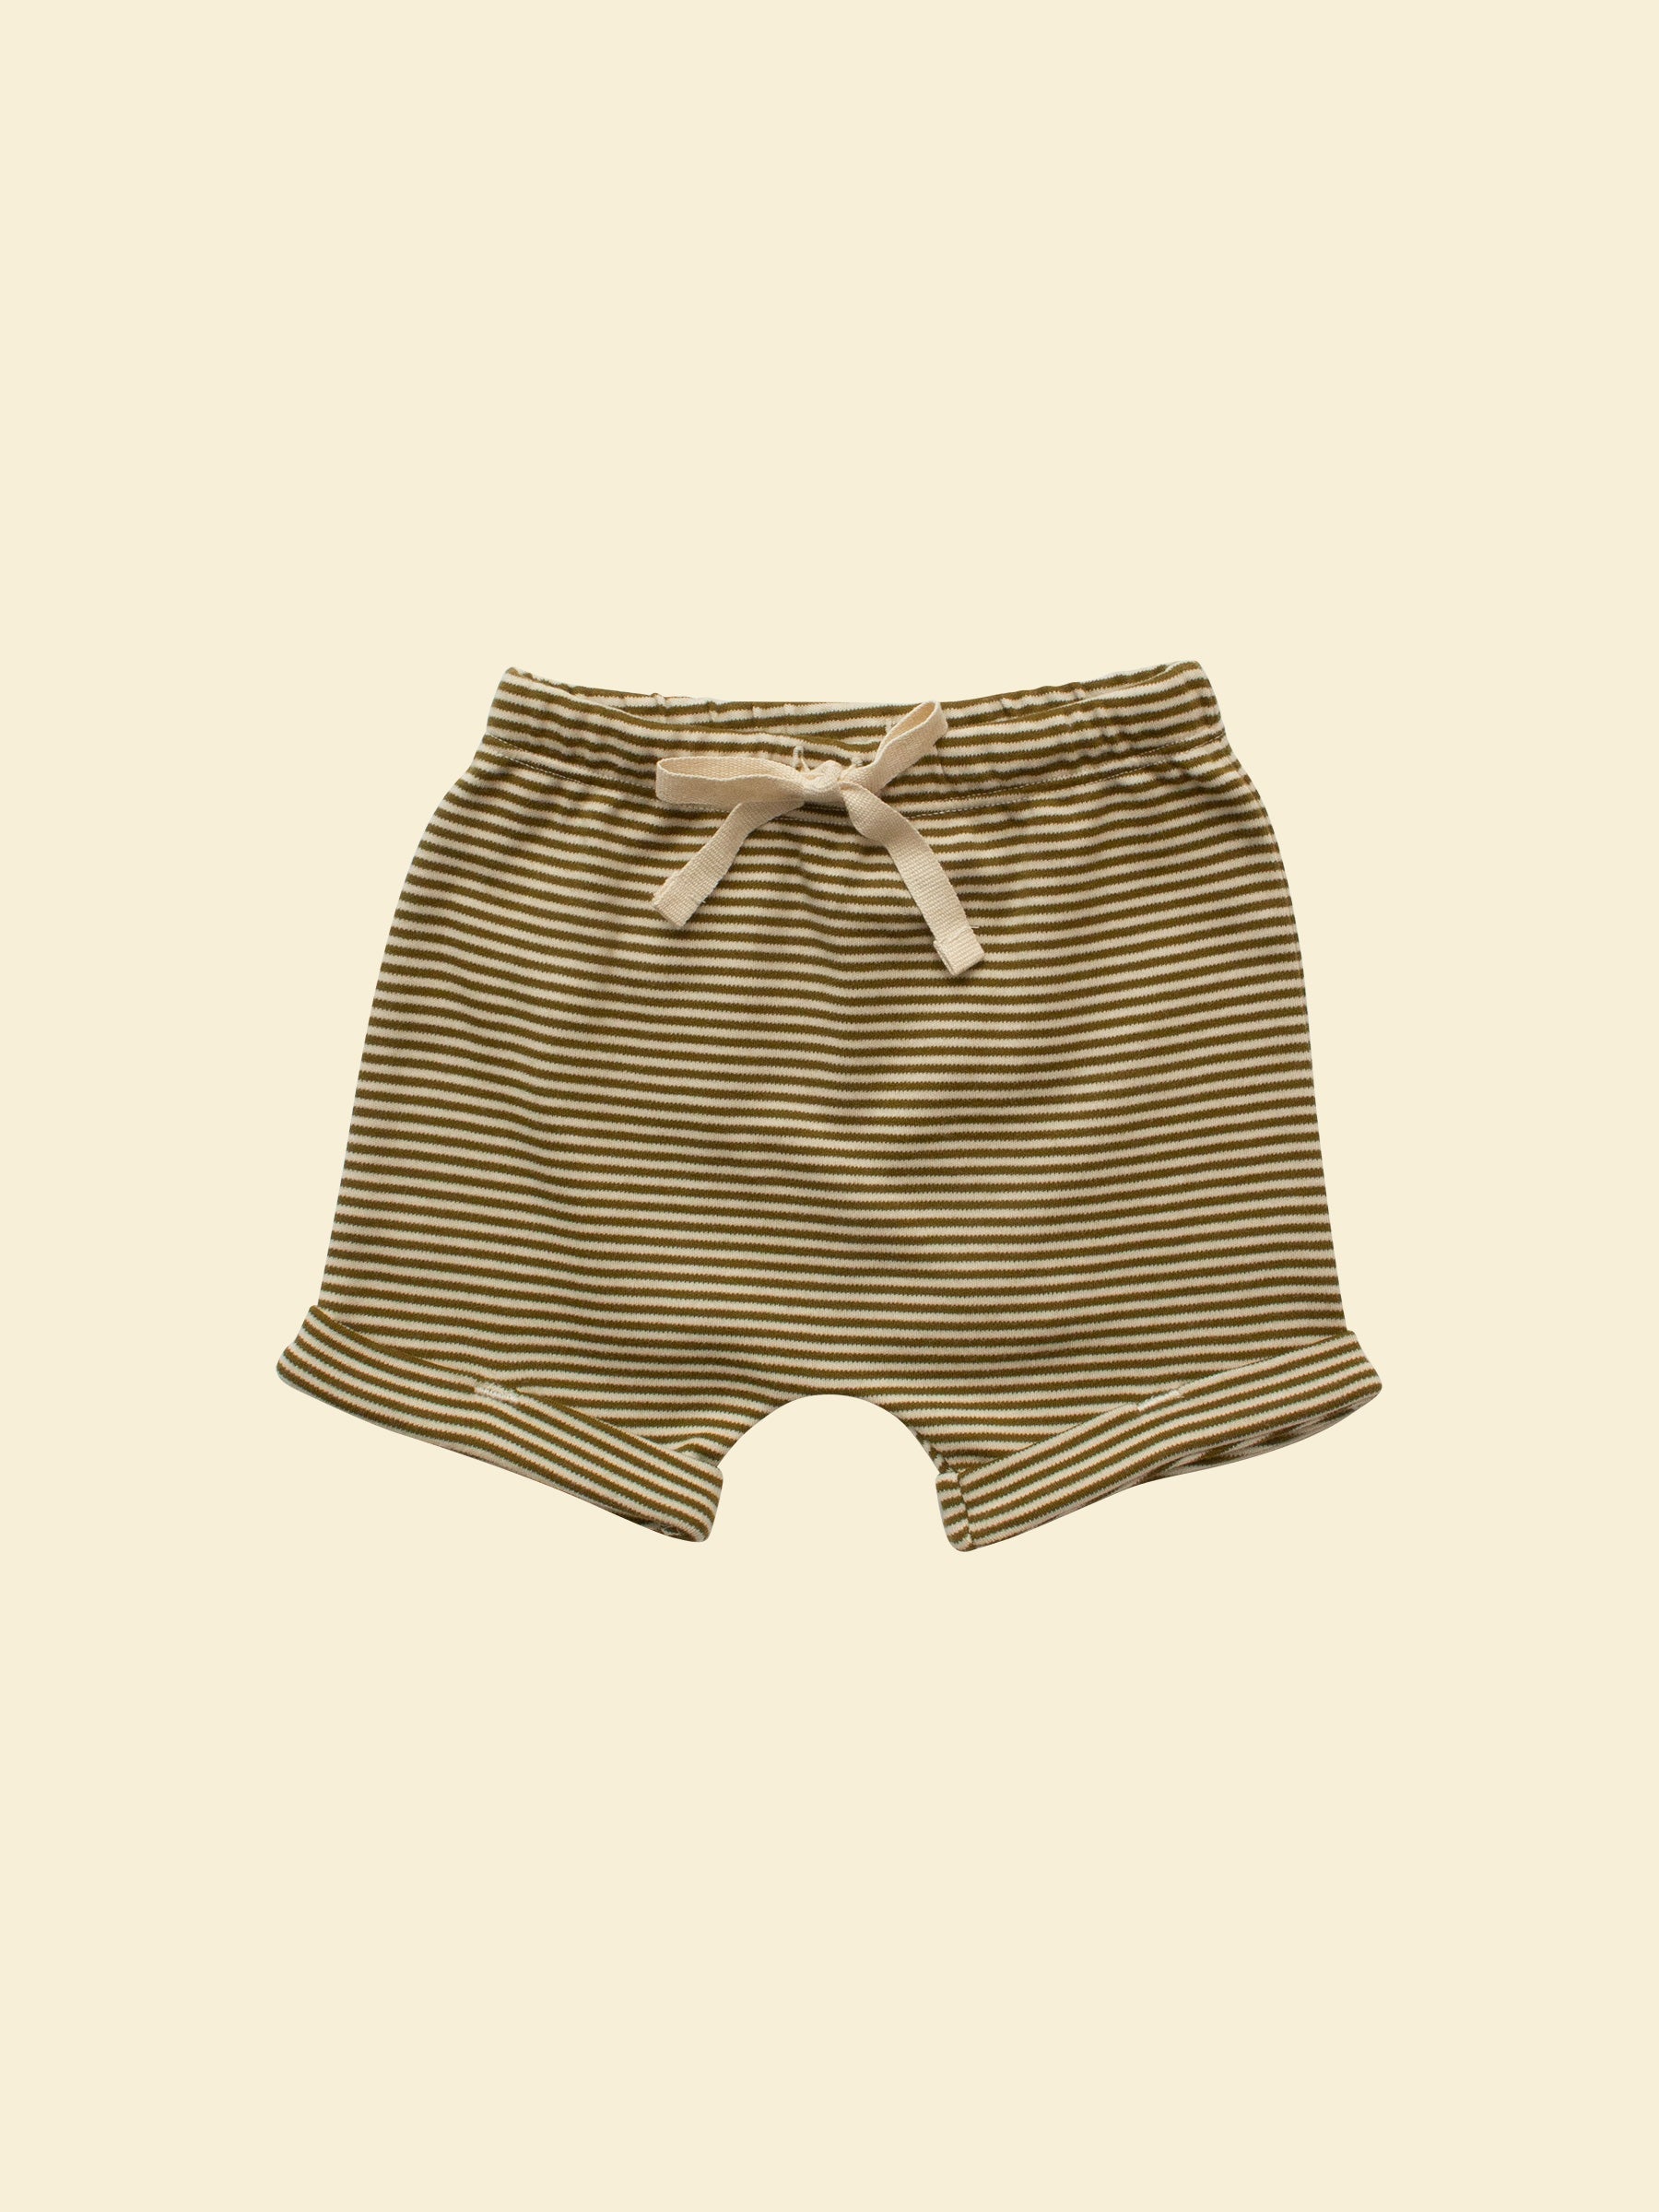 Shorts in Olive Stripe (Front)